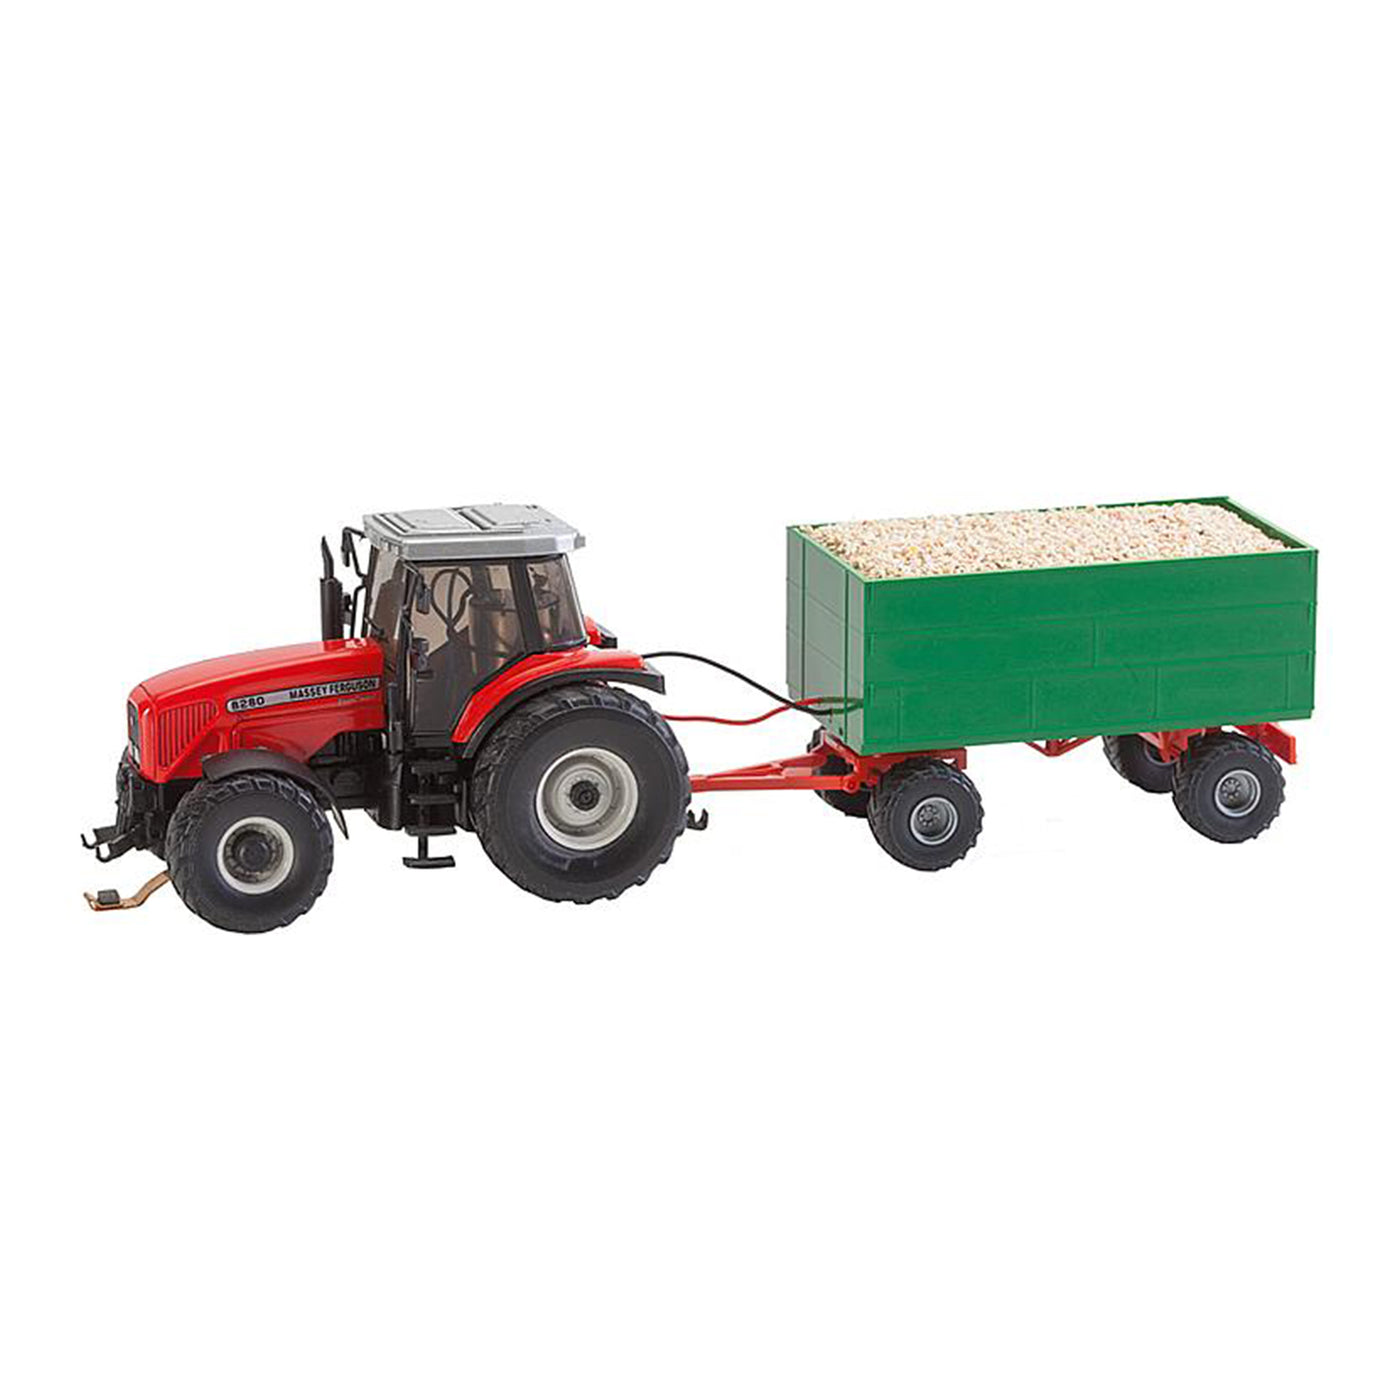 MF Tractor w/Wood Chips Trailers Wiking